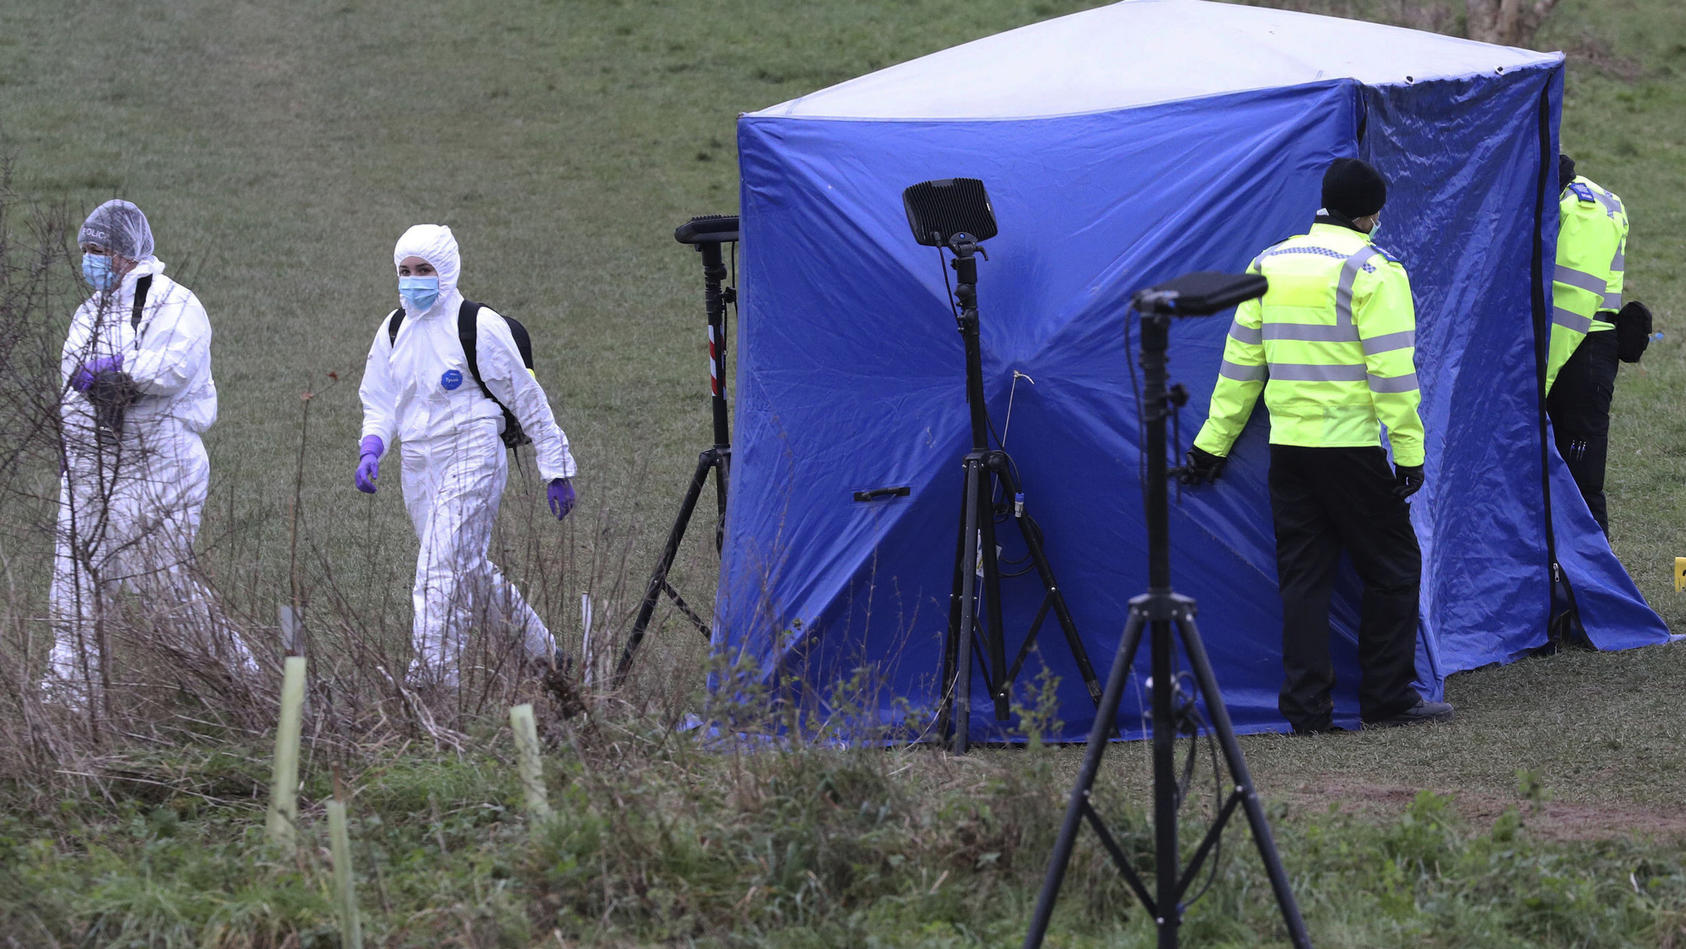 Police forensic officers attend the scene where a 13-year old boy died after being stabbed on Sunday, at the Bugs Bottom field in Reading, England, Monday Jan. 4, 2021.  The police have said five teenagers aged between 13 and 14 are being held in con